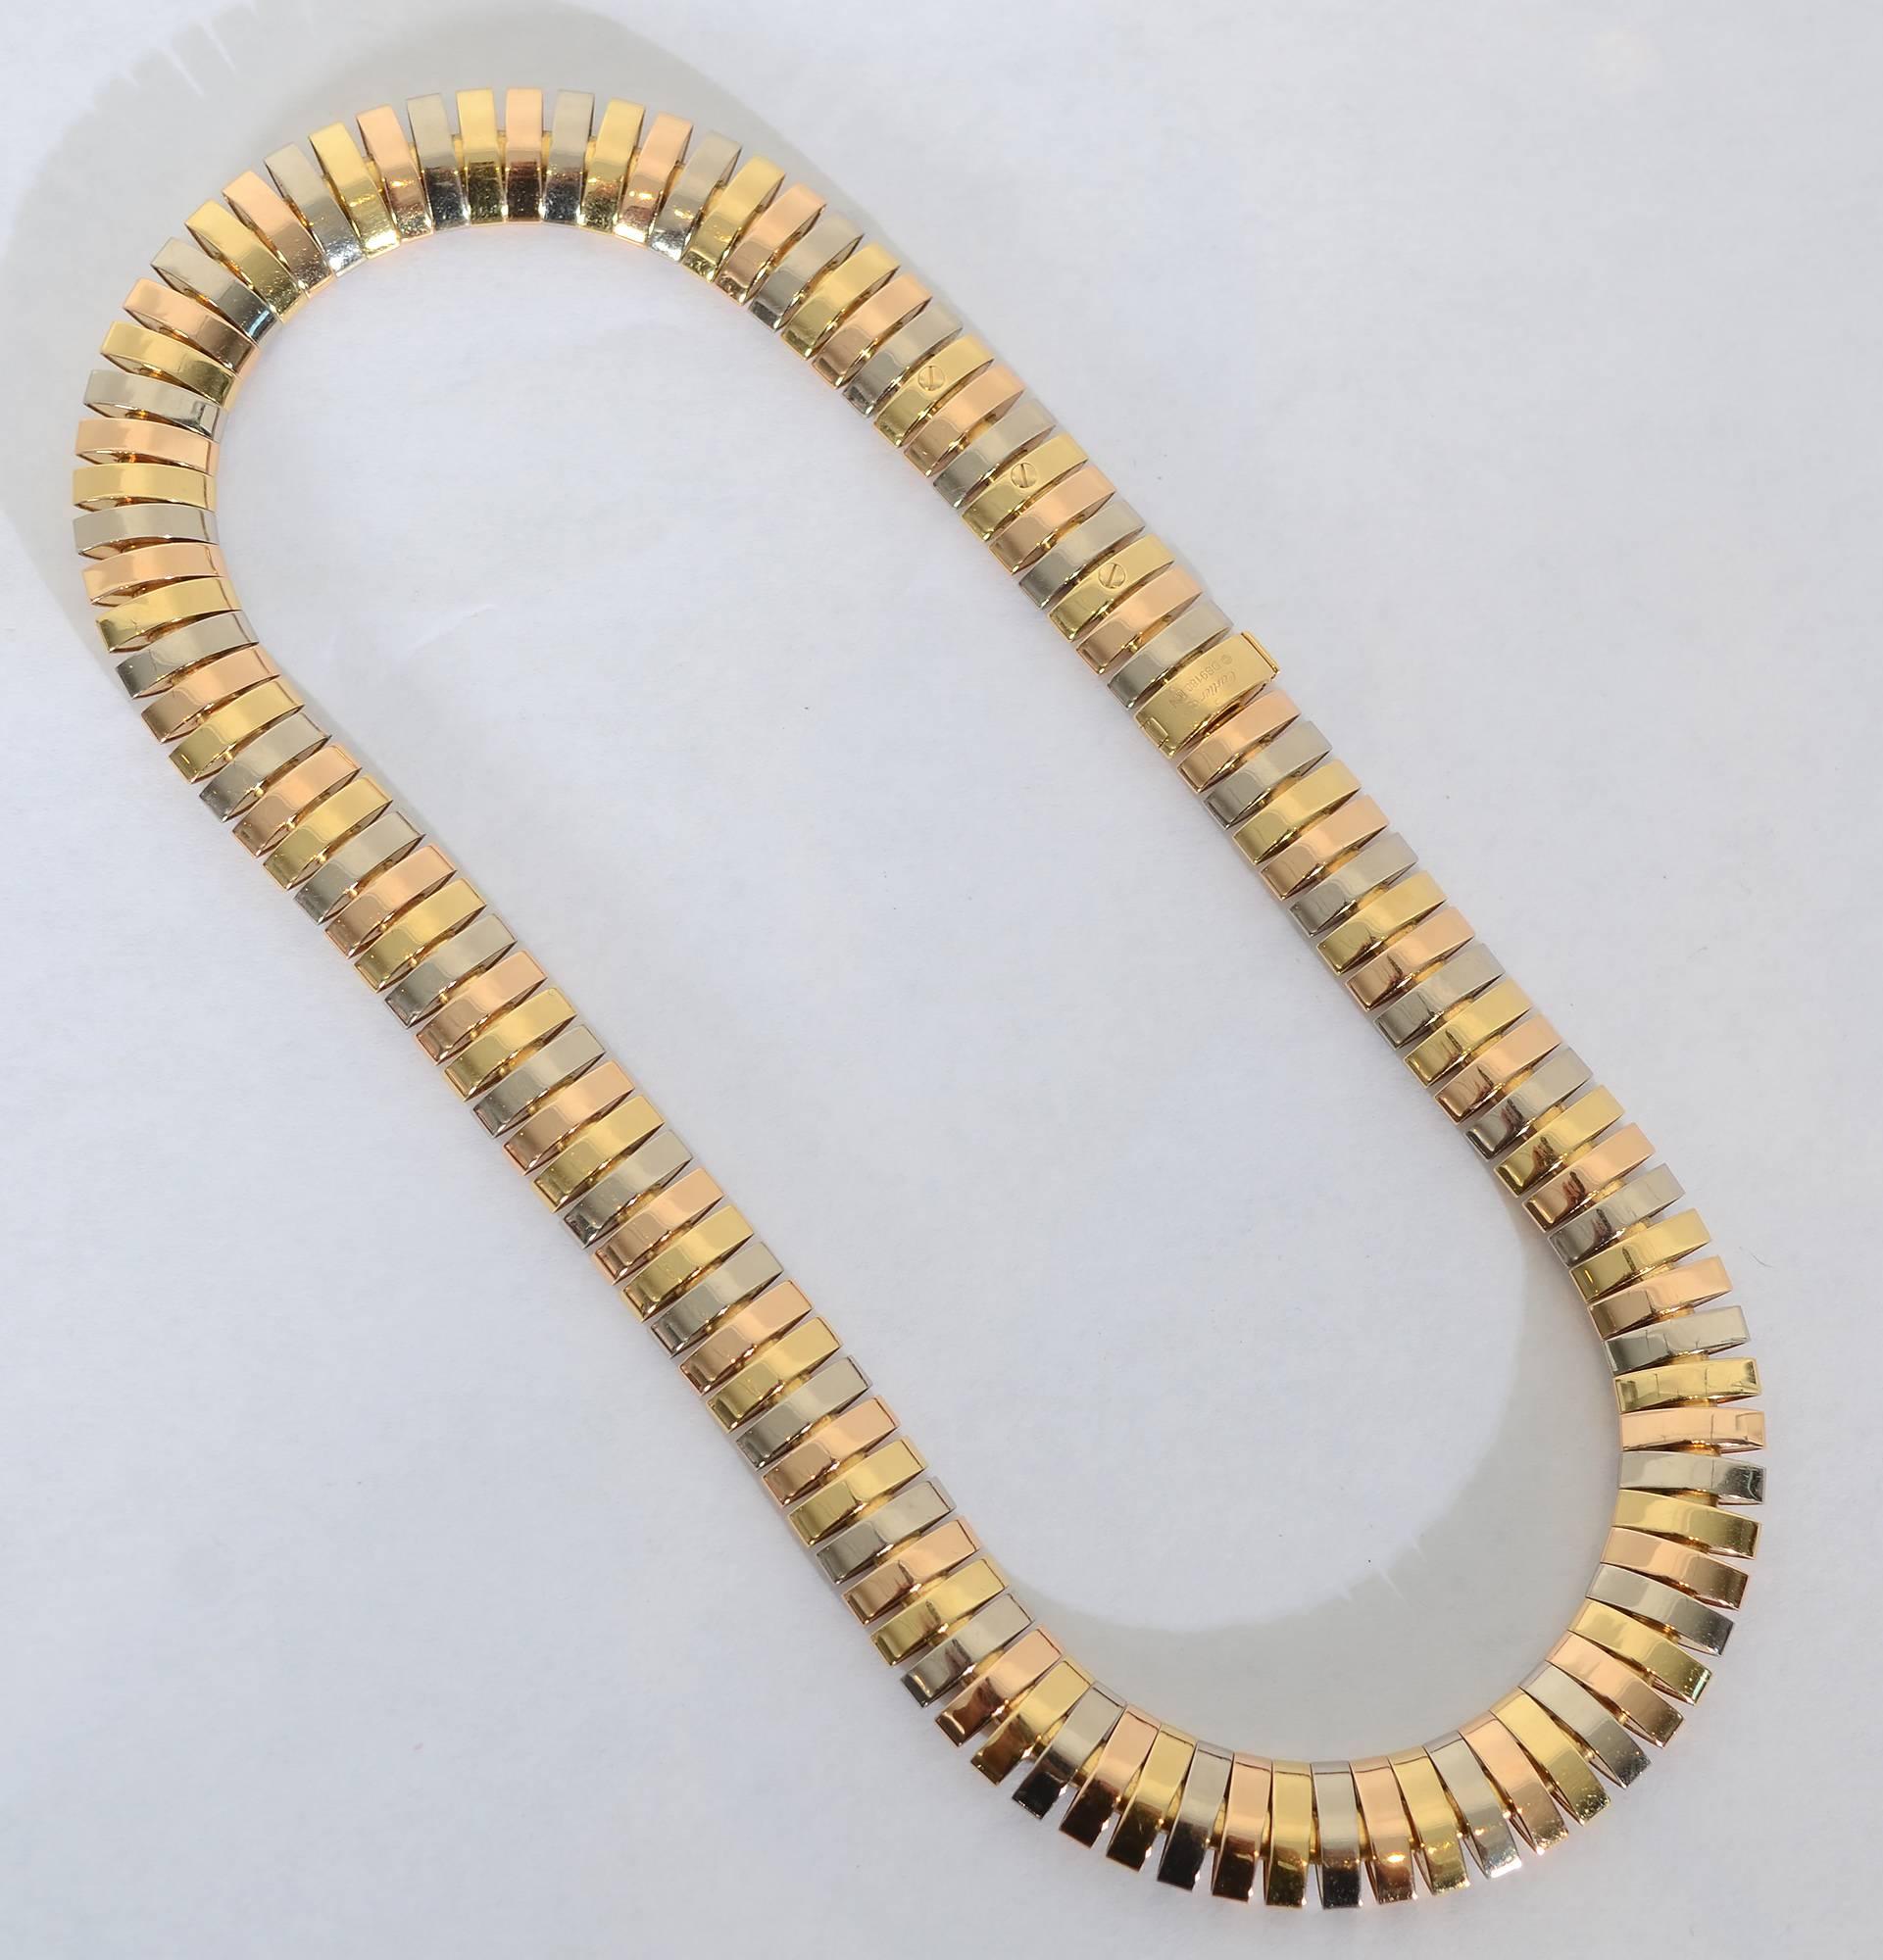 Cartier choker necklace made of the trinity of 18 karat gold colors for which they are so well known. The necklace is wonderfully supple and comfortable to wear. Measurements are 16 inches in length and half an inch in width. 